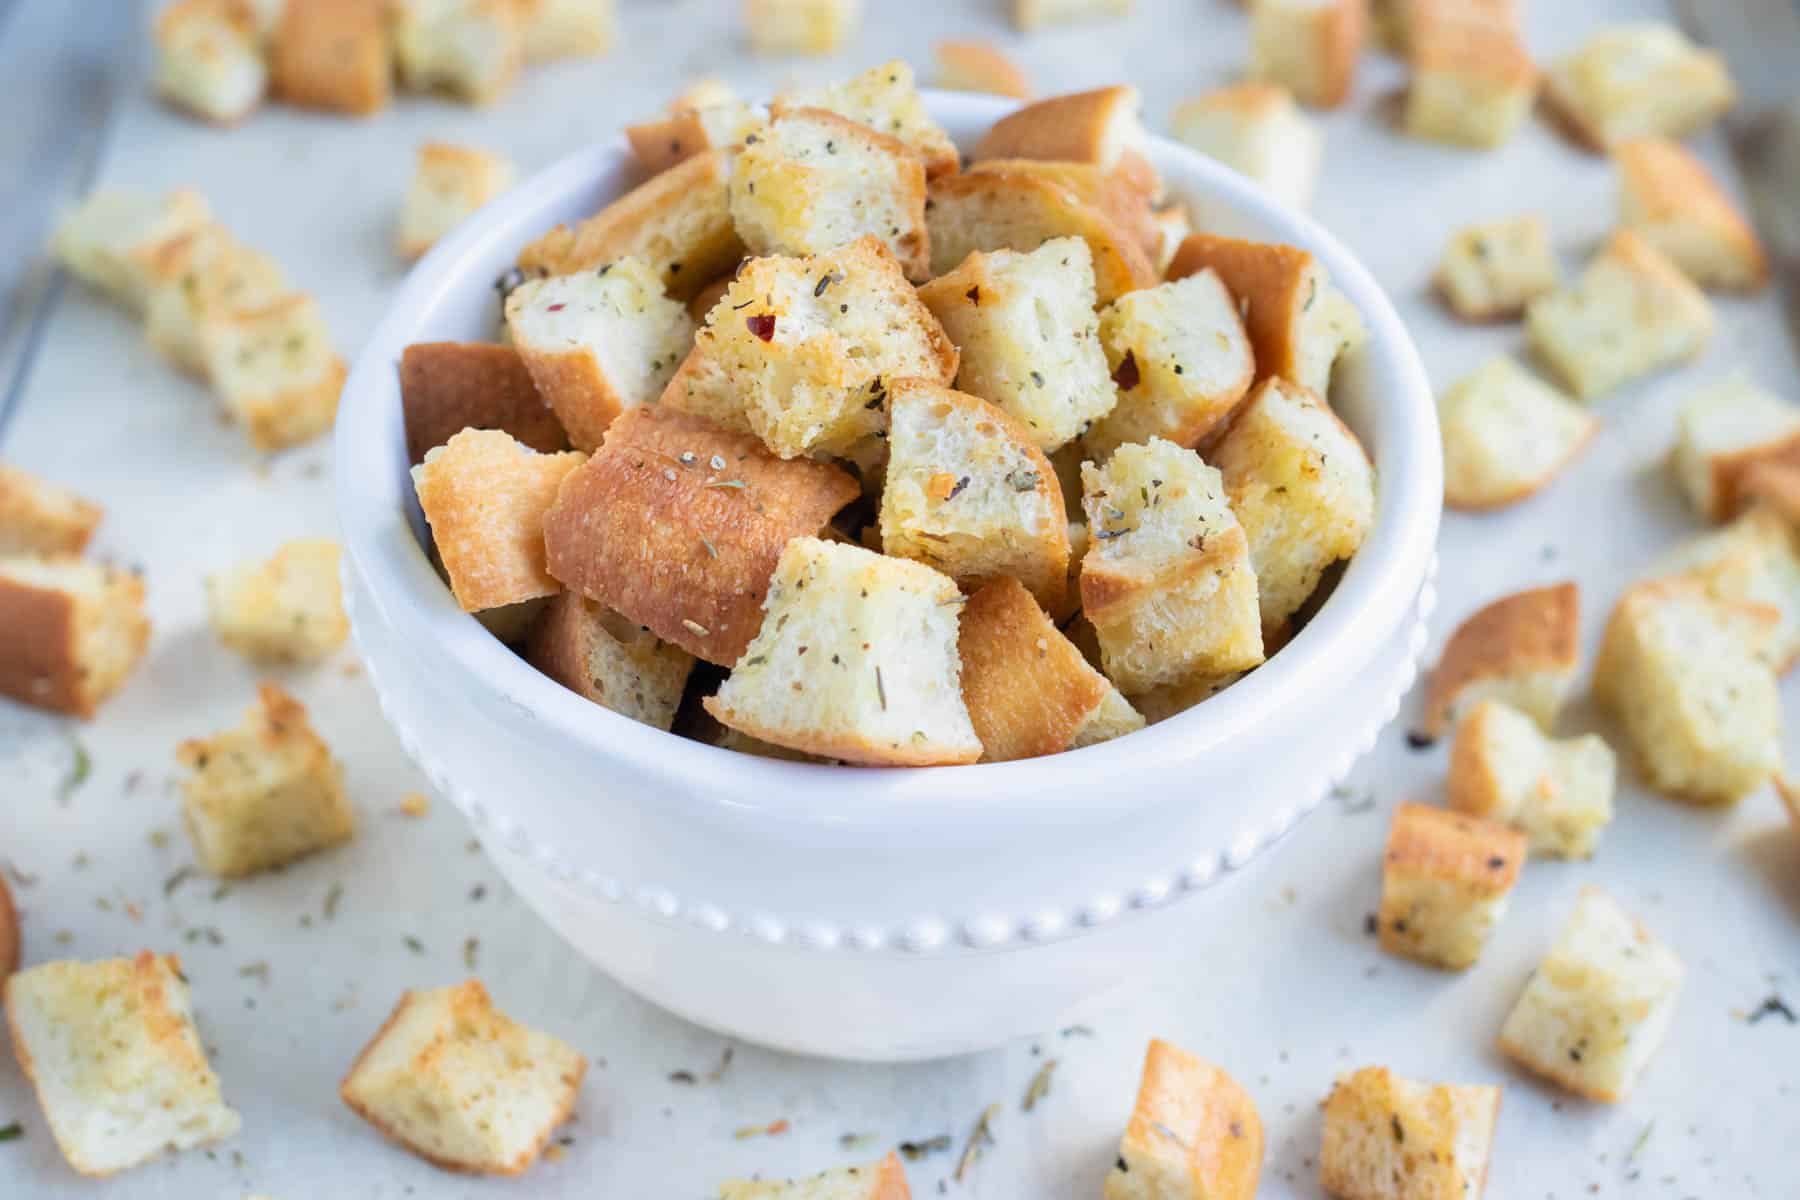 Best Homemade Croutons Recipe - Evolving Table